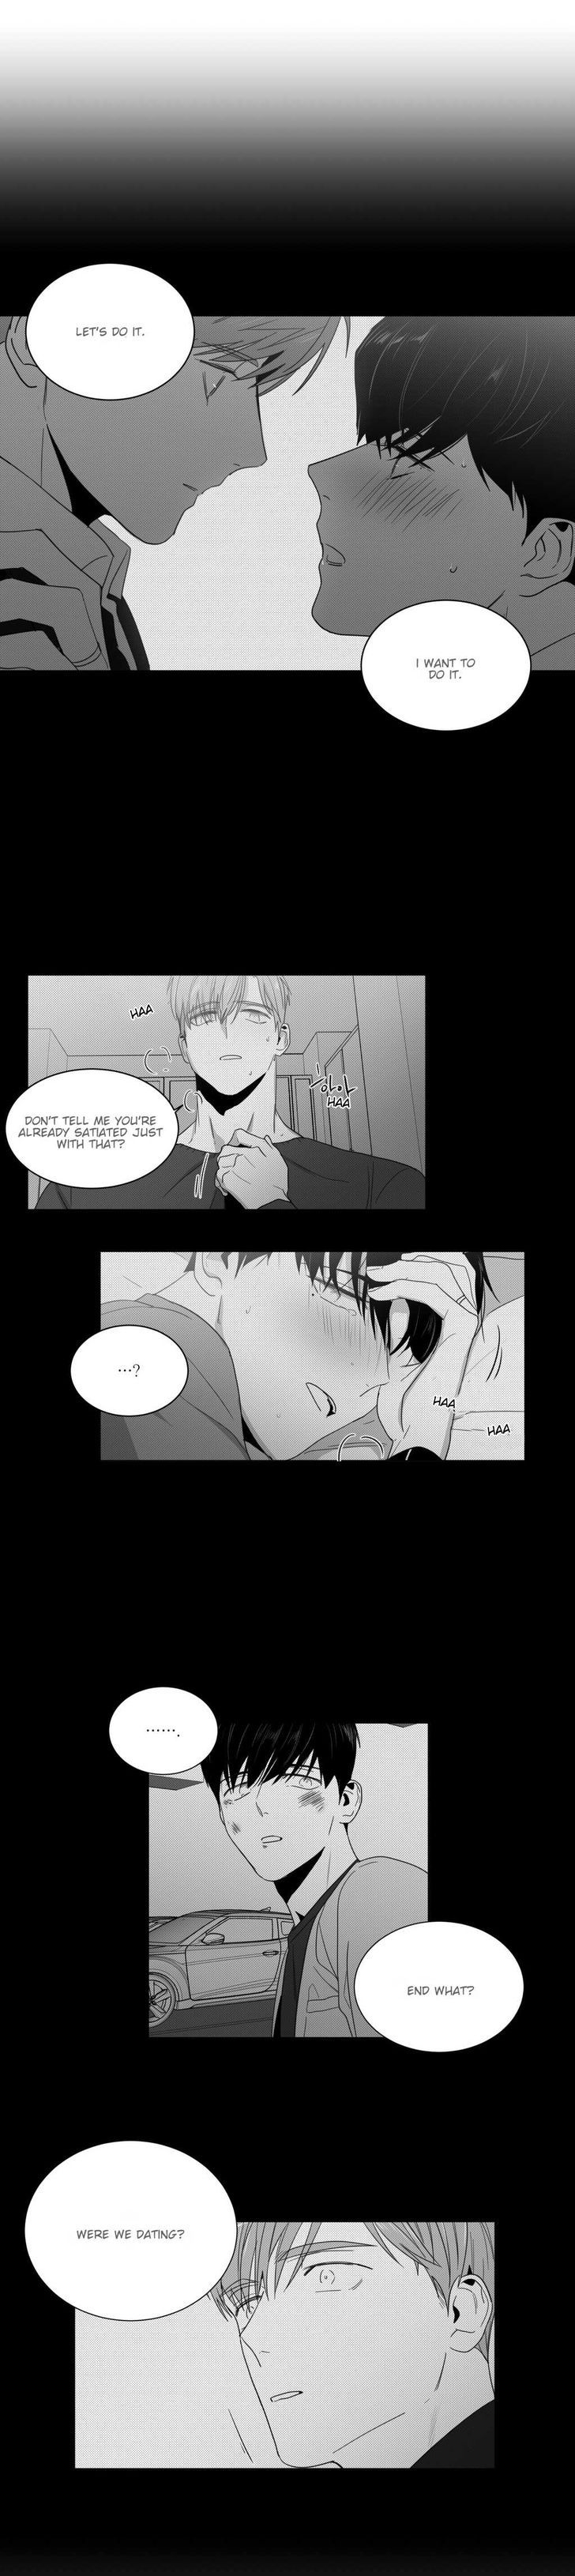 Lover Boy (Lezhin) Chapter 028 page 6